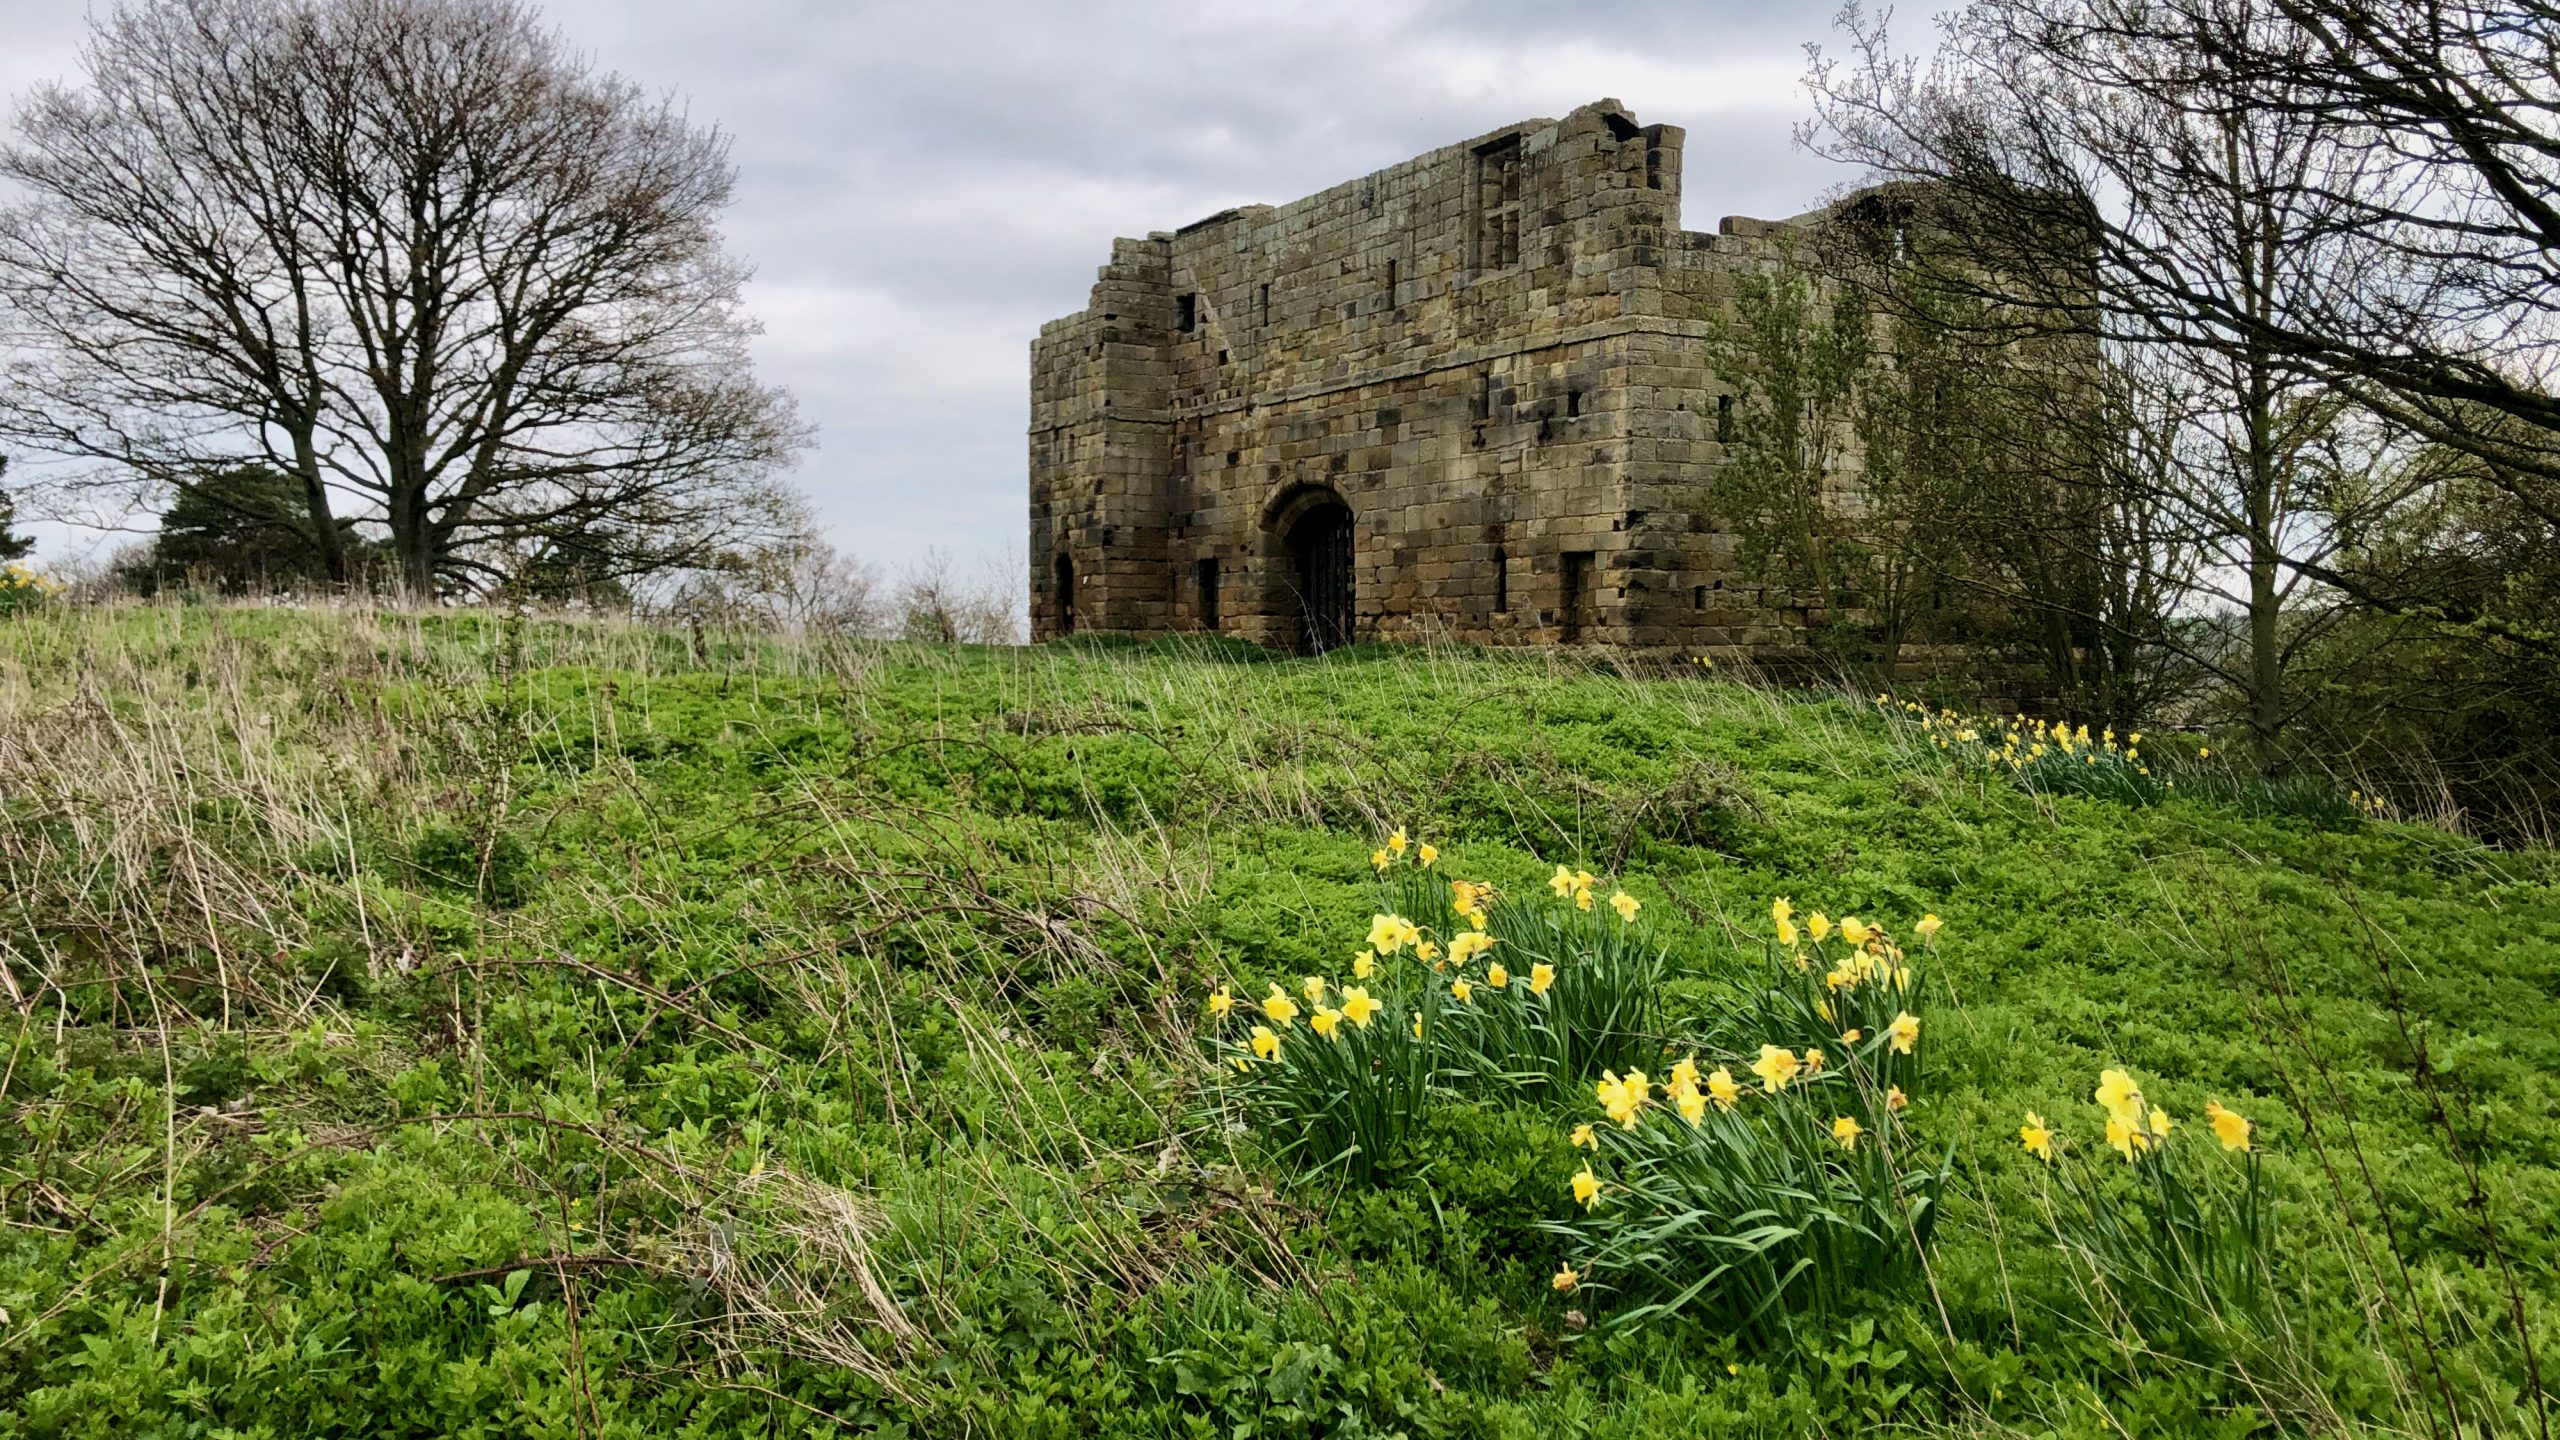 Rear view of the ruined gatehouse to Whorlton Castle. Daffodils provide a contrast in the foreground.